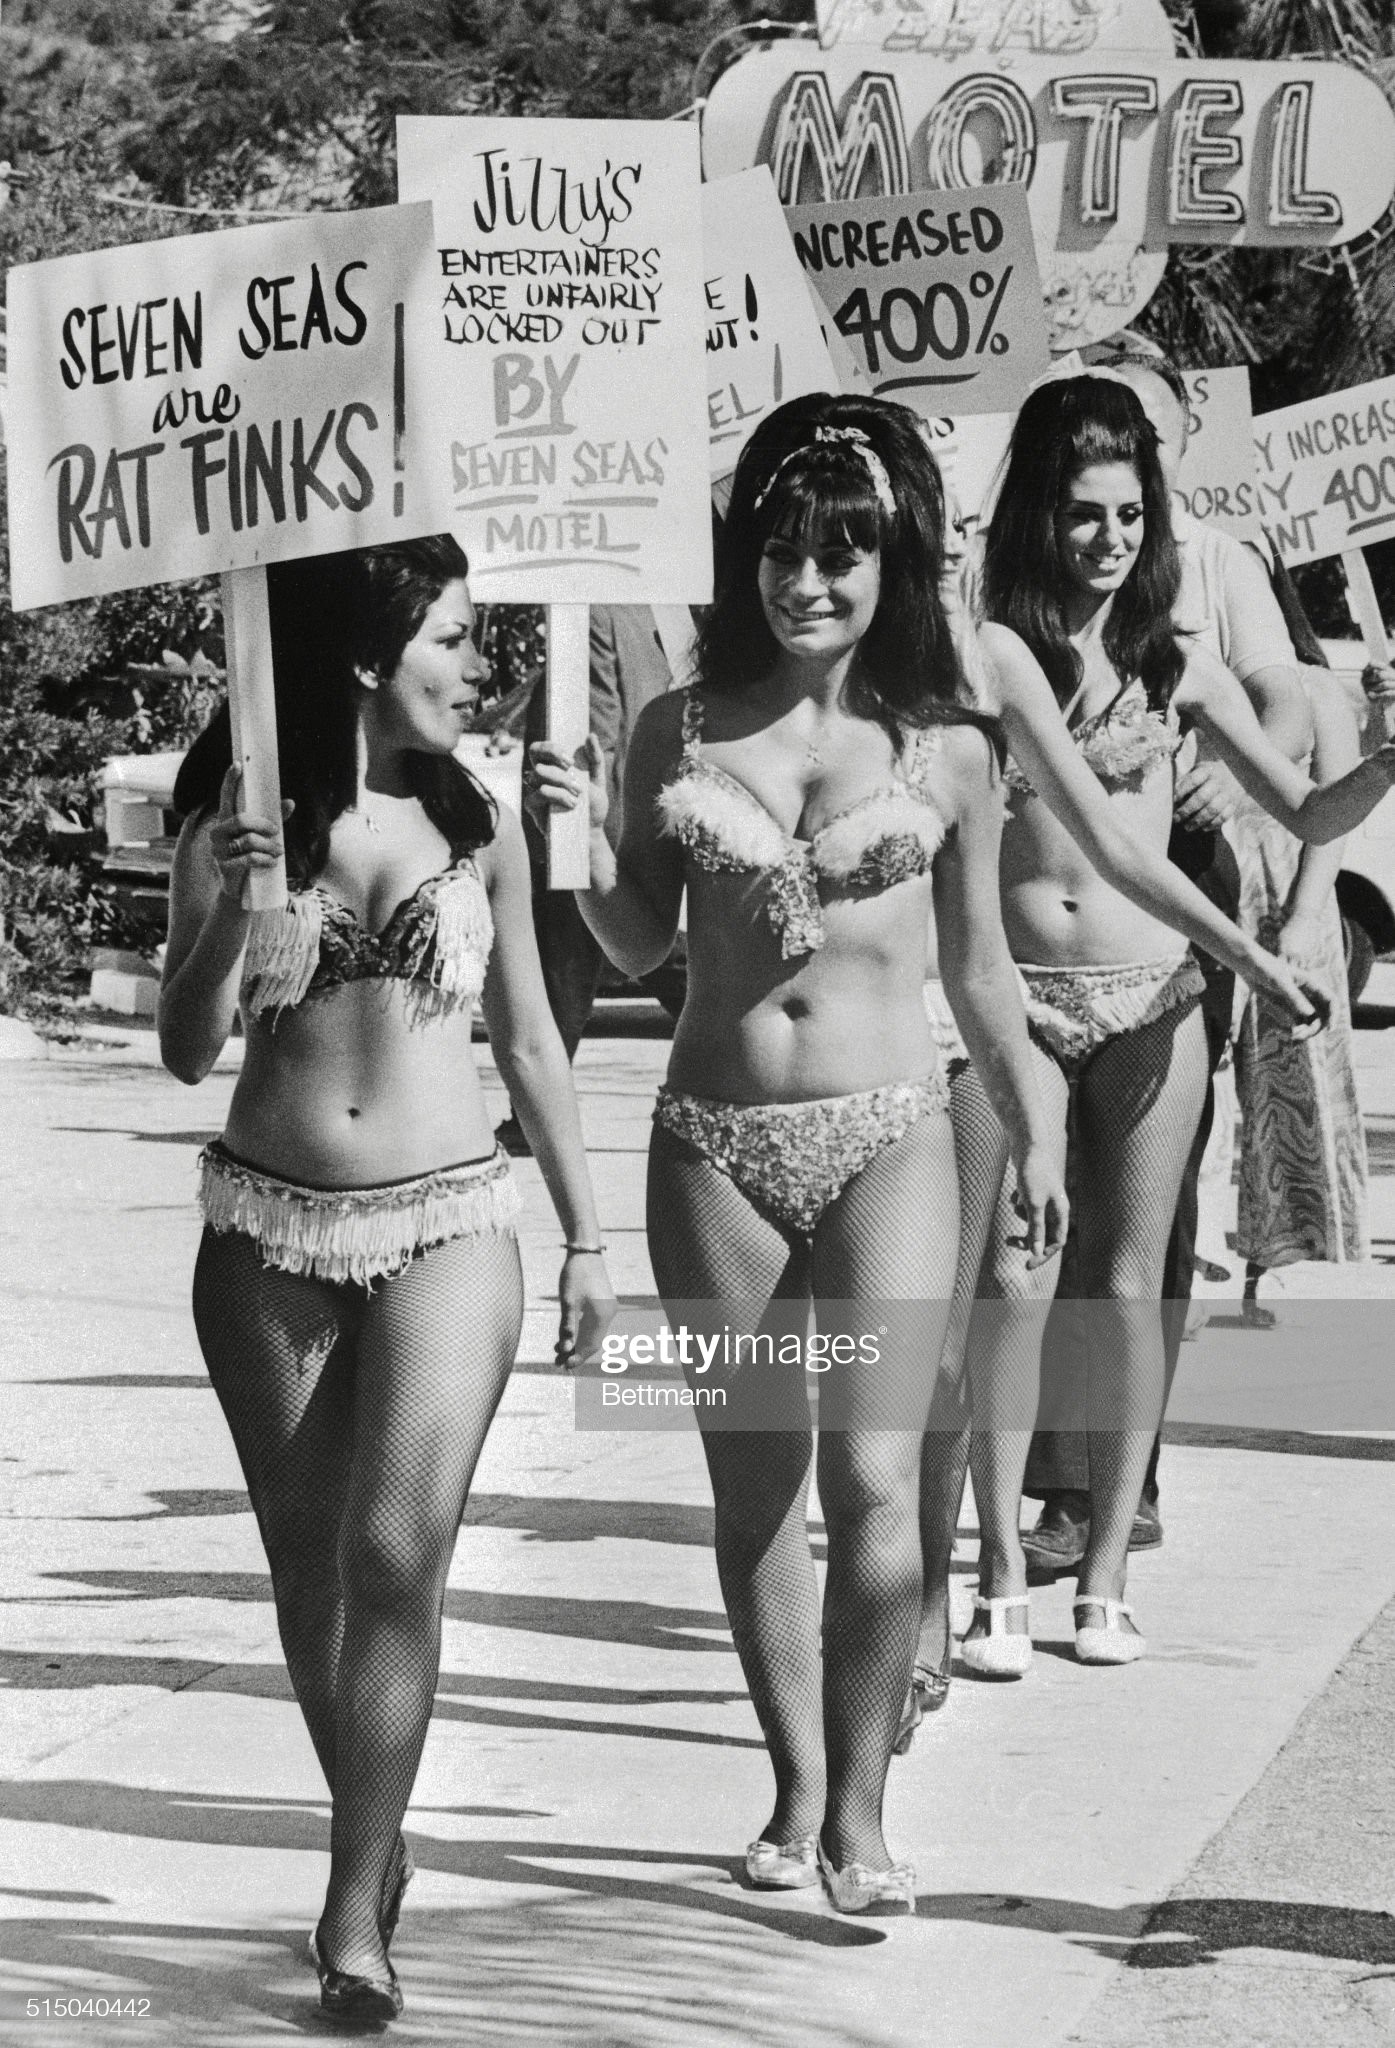 A group of Go-Go girls who claim they had a verbal agreement with the management of a motel regarding their residency there through the season, picketed the motel here 2/16 in protest of a rent hike, which they feel was not in the agreement. Dressed in the costumes they wear during their act at Jilly's, a Miami Beach nightclub, the girls were joined by other entertainers and a few drummers who have the same gripe. February 16, 1968. 